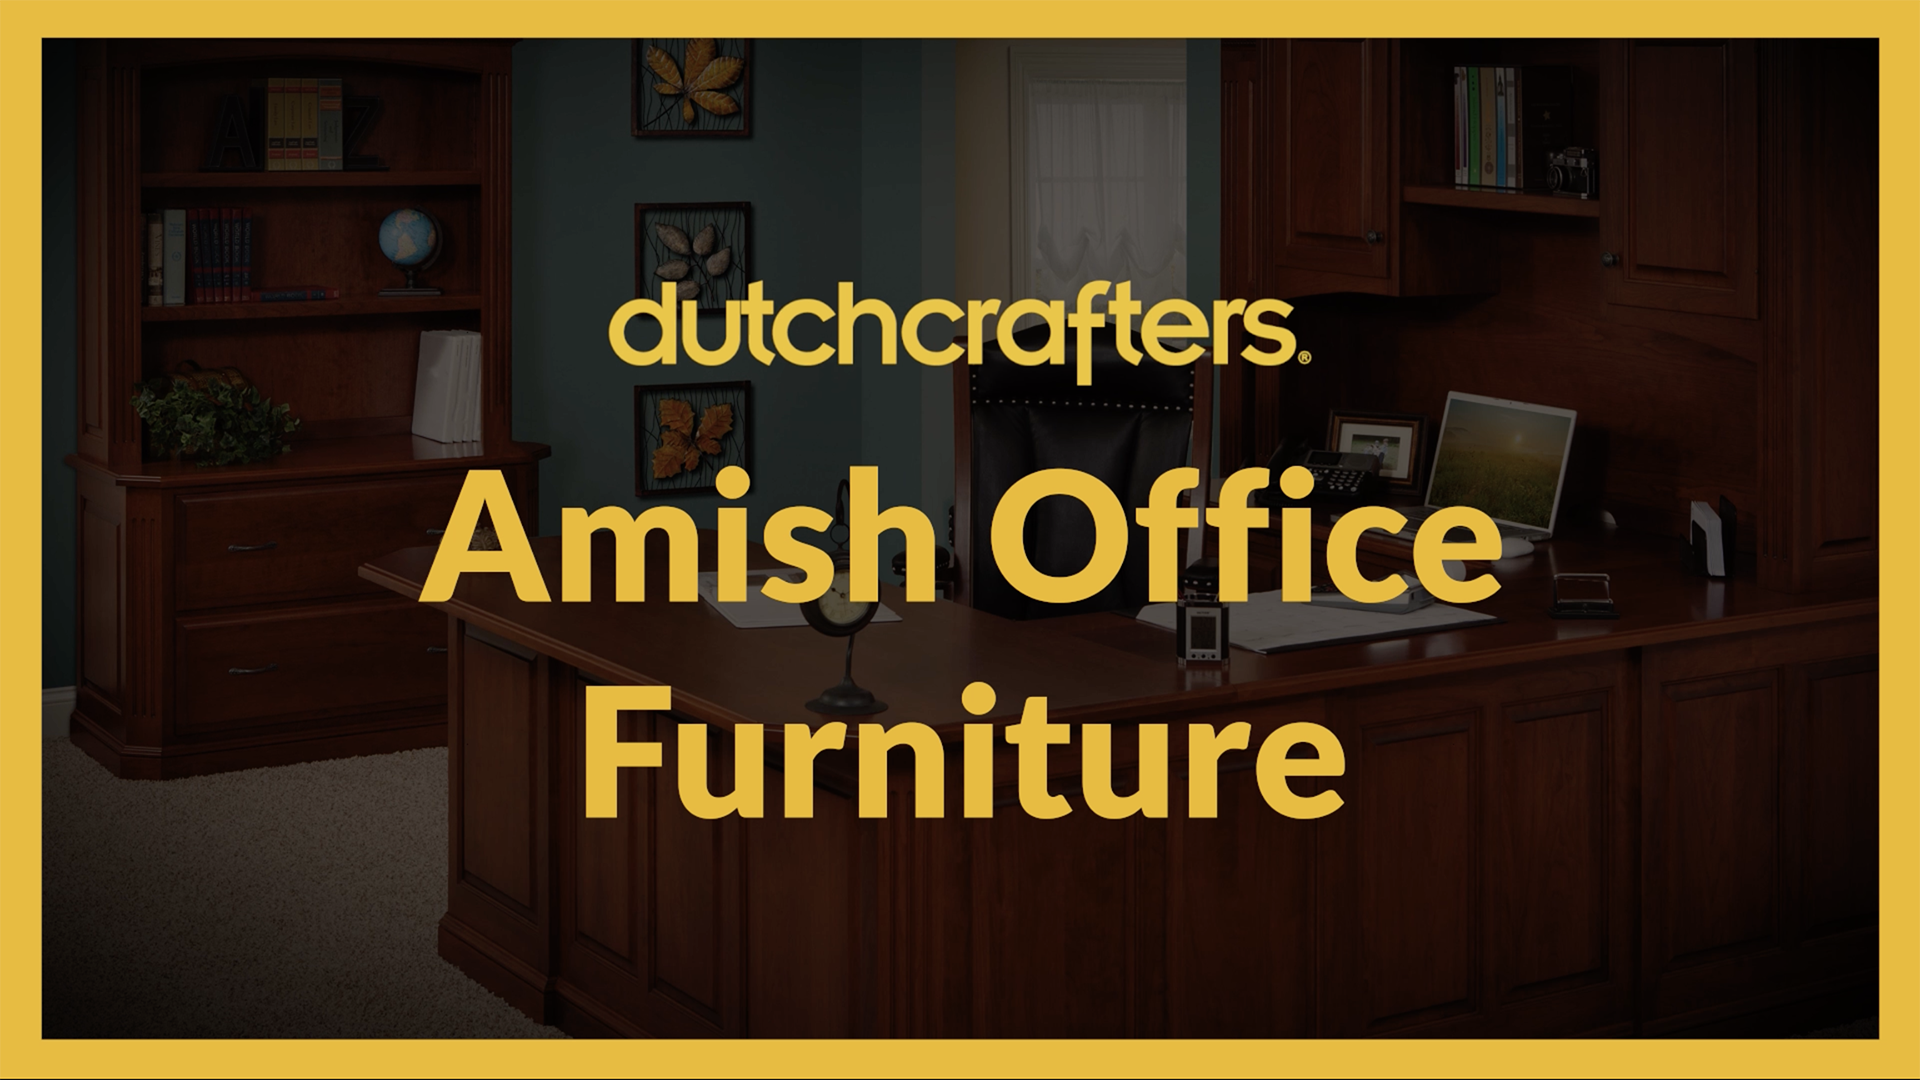 "DutchCrafters Amish Office Furniture" over an image of a desk and bookcase